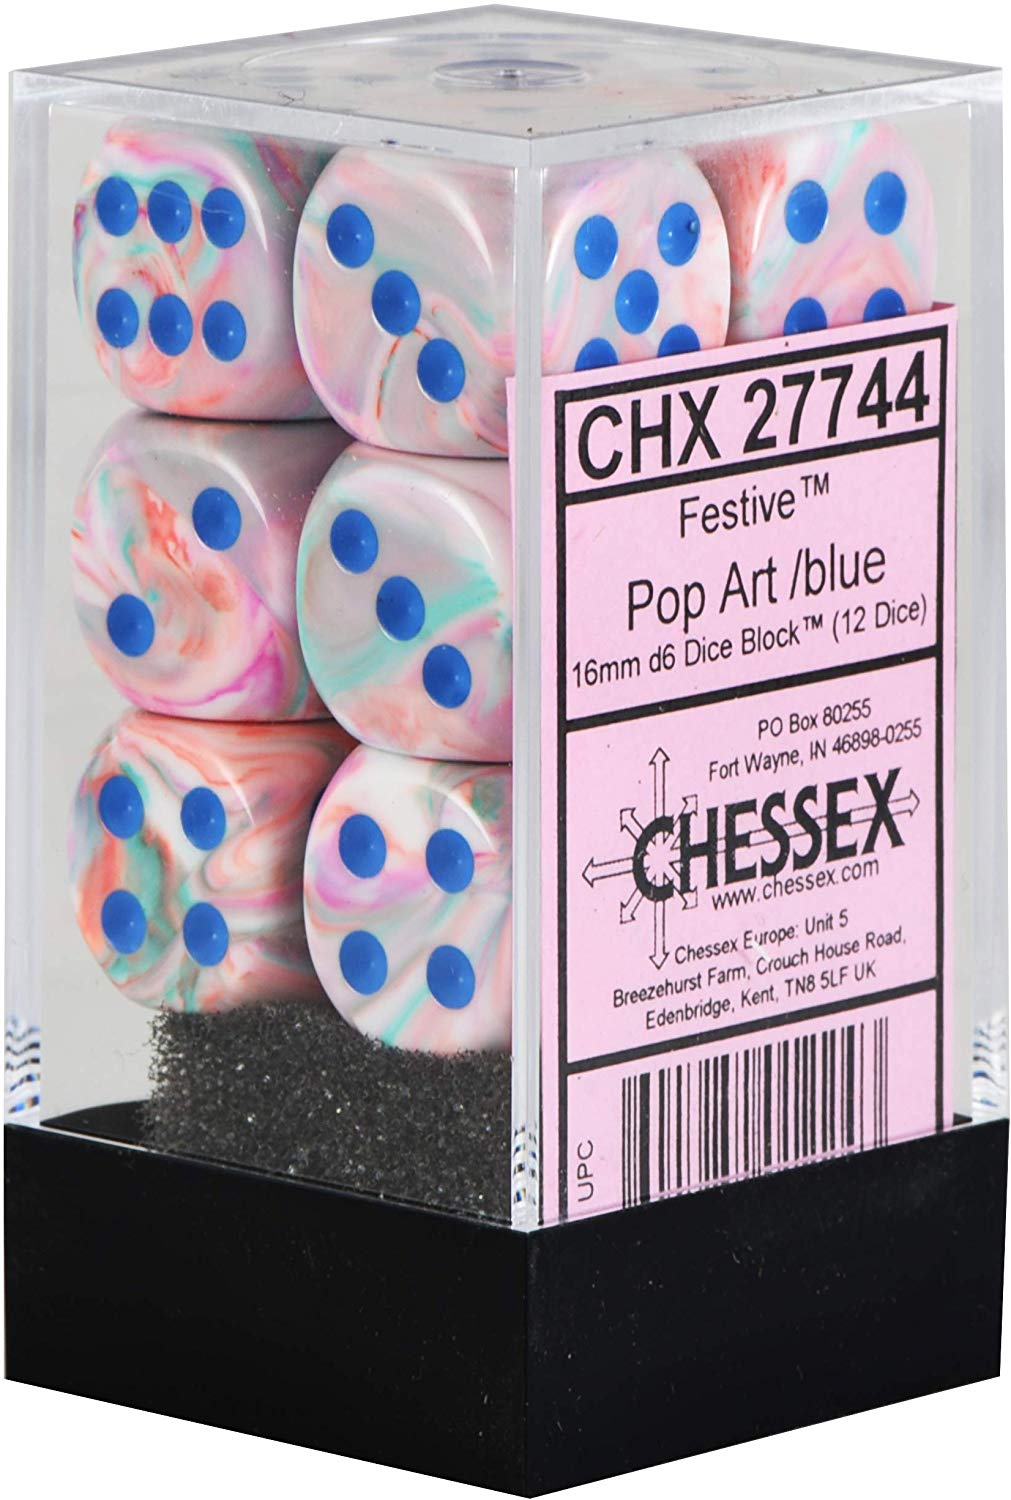 Chessex 16mm d6 with pips Dice Blocks (12 Dice) - Festive Polyhedral Pop Art /blue კამათელი